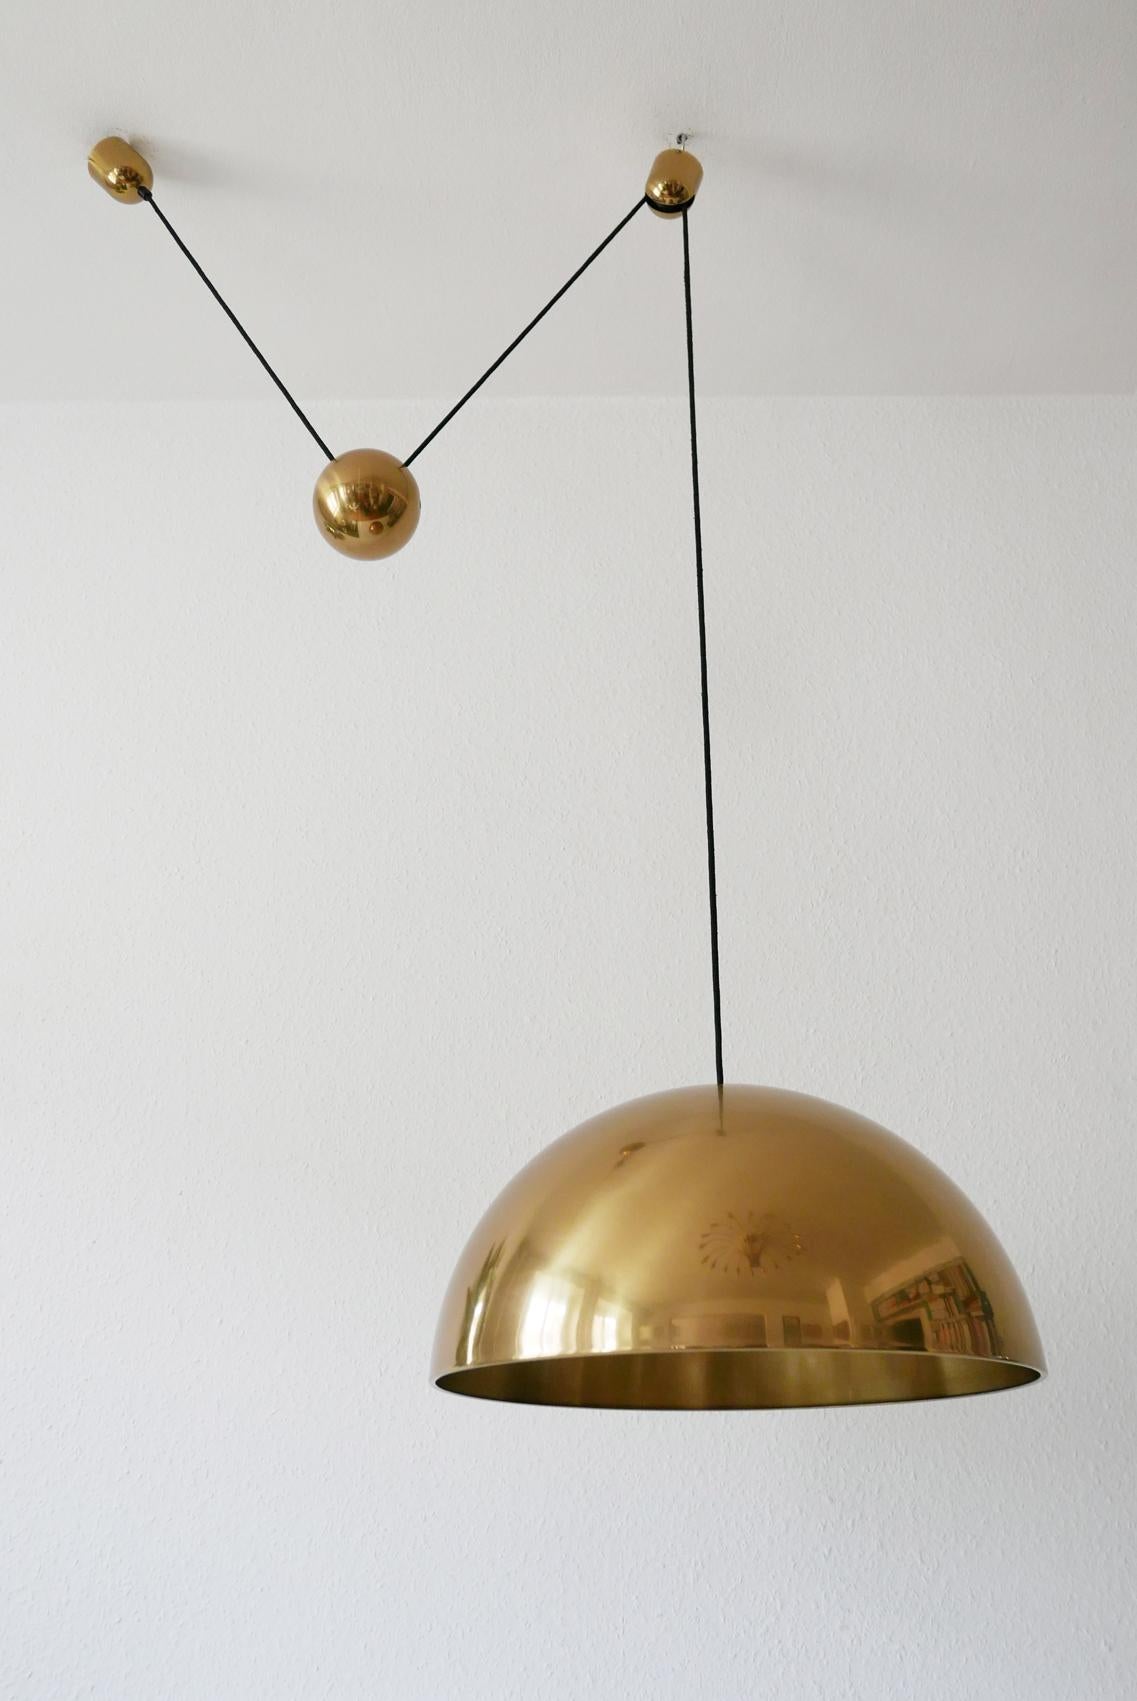 Exceptional Solan Counter Balance Pendant Lamp by Florian Schulz, 1980s, Germany For Sale 1